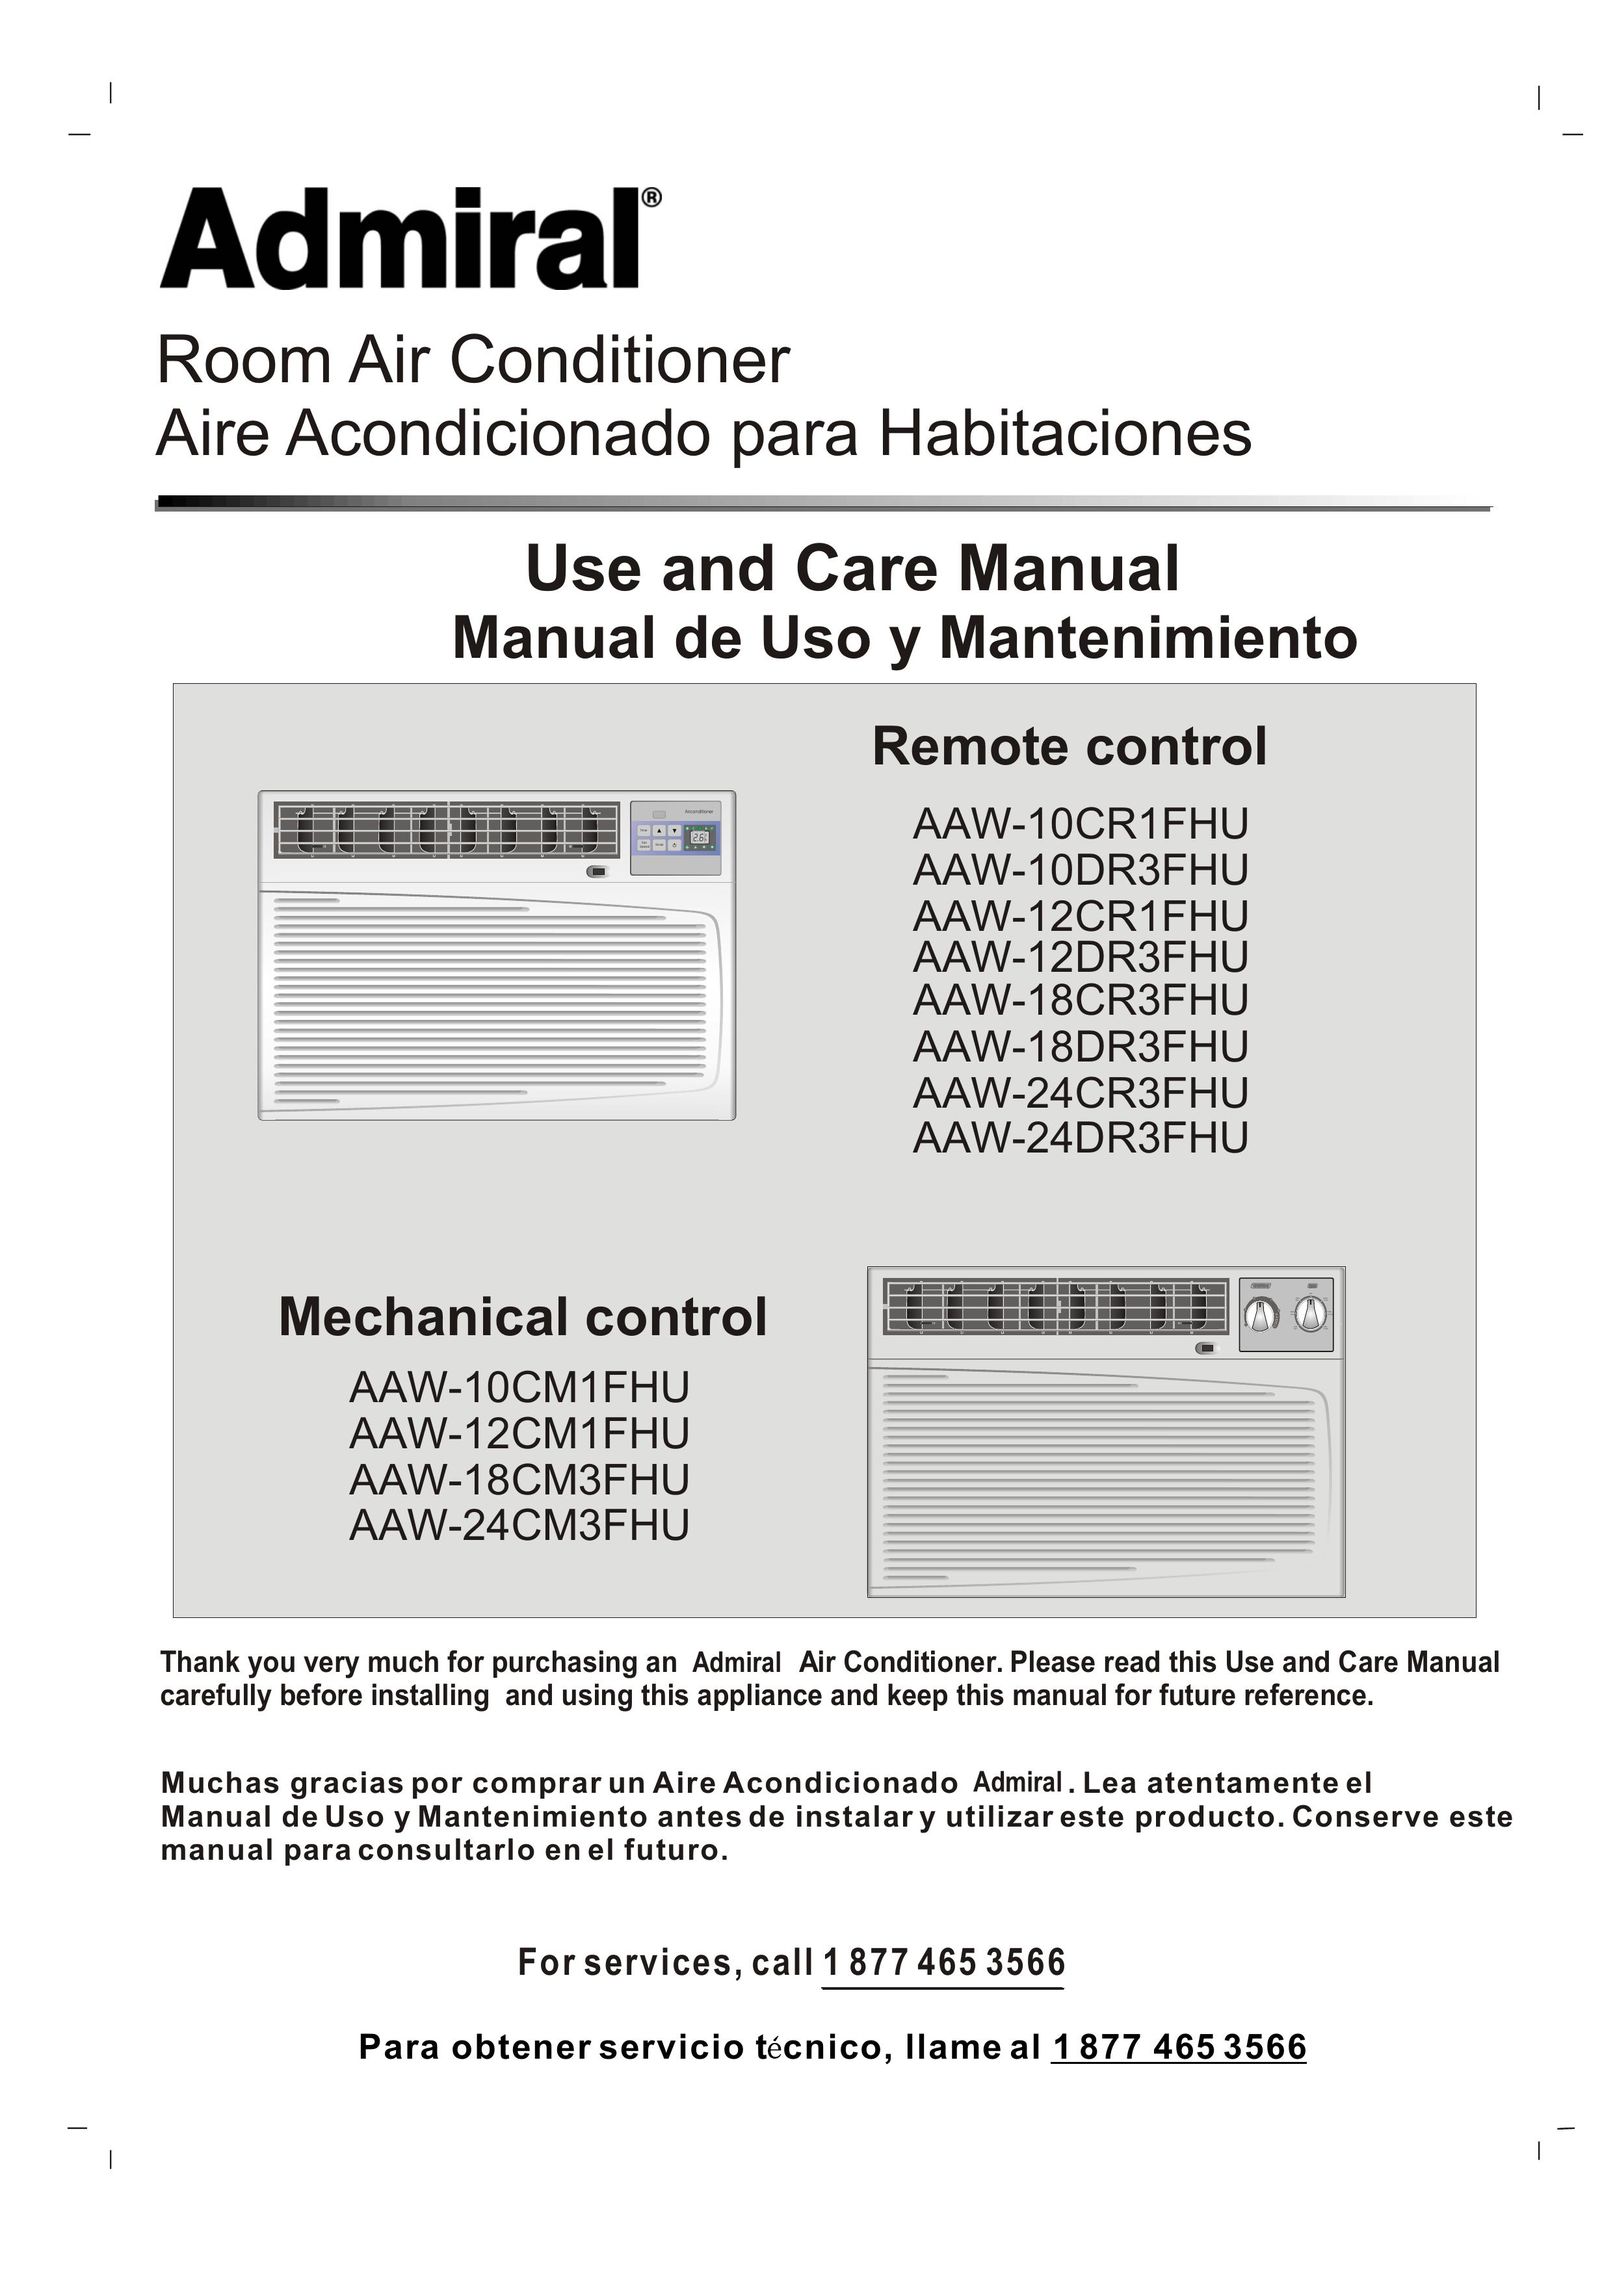 Admiral AAW-24CR3FHU Air Conditioner User Manual